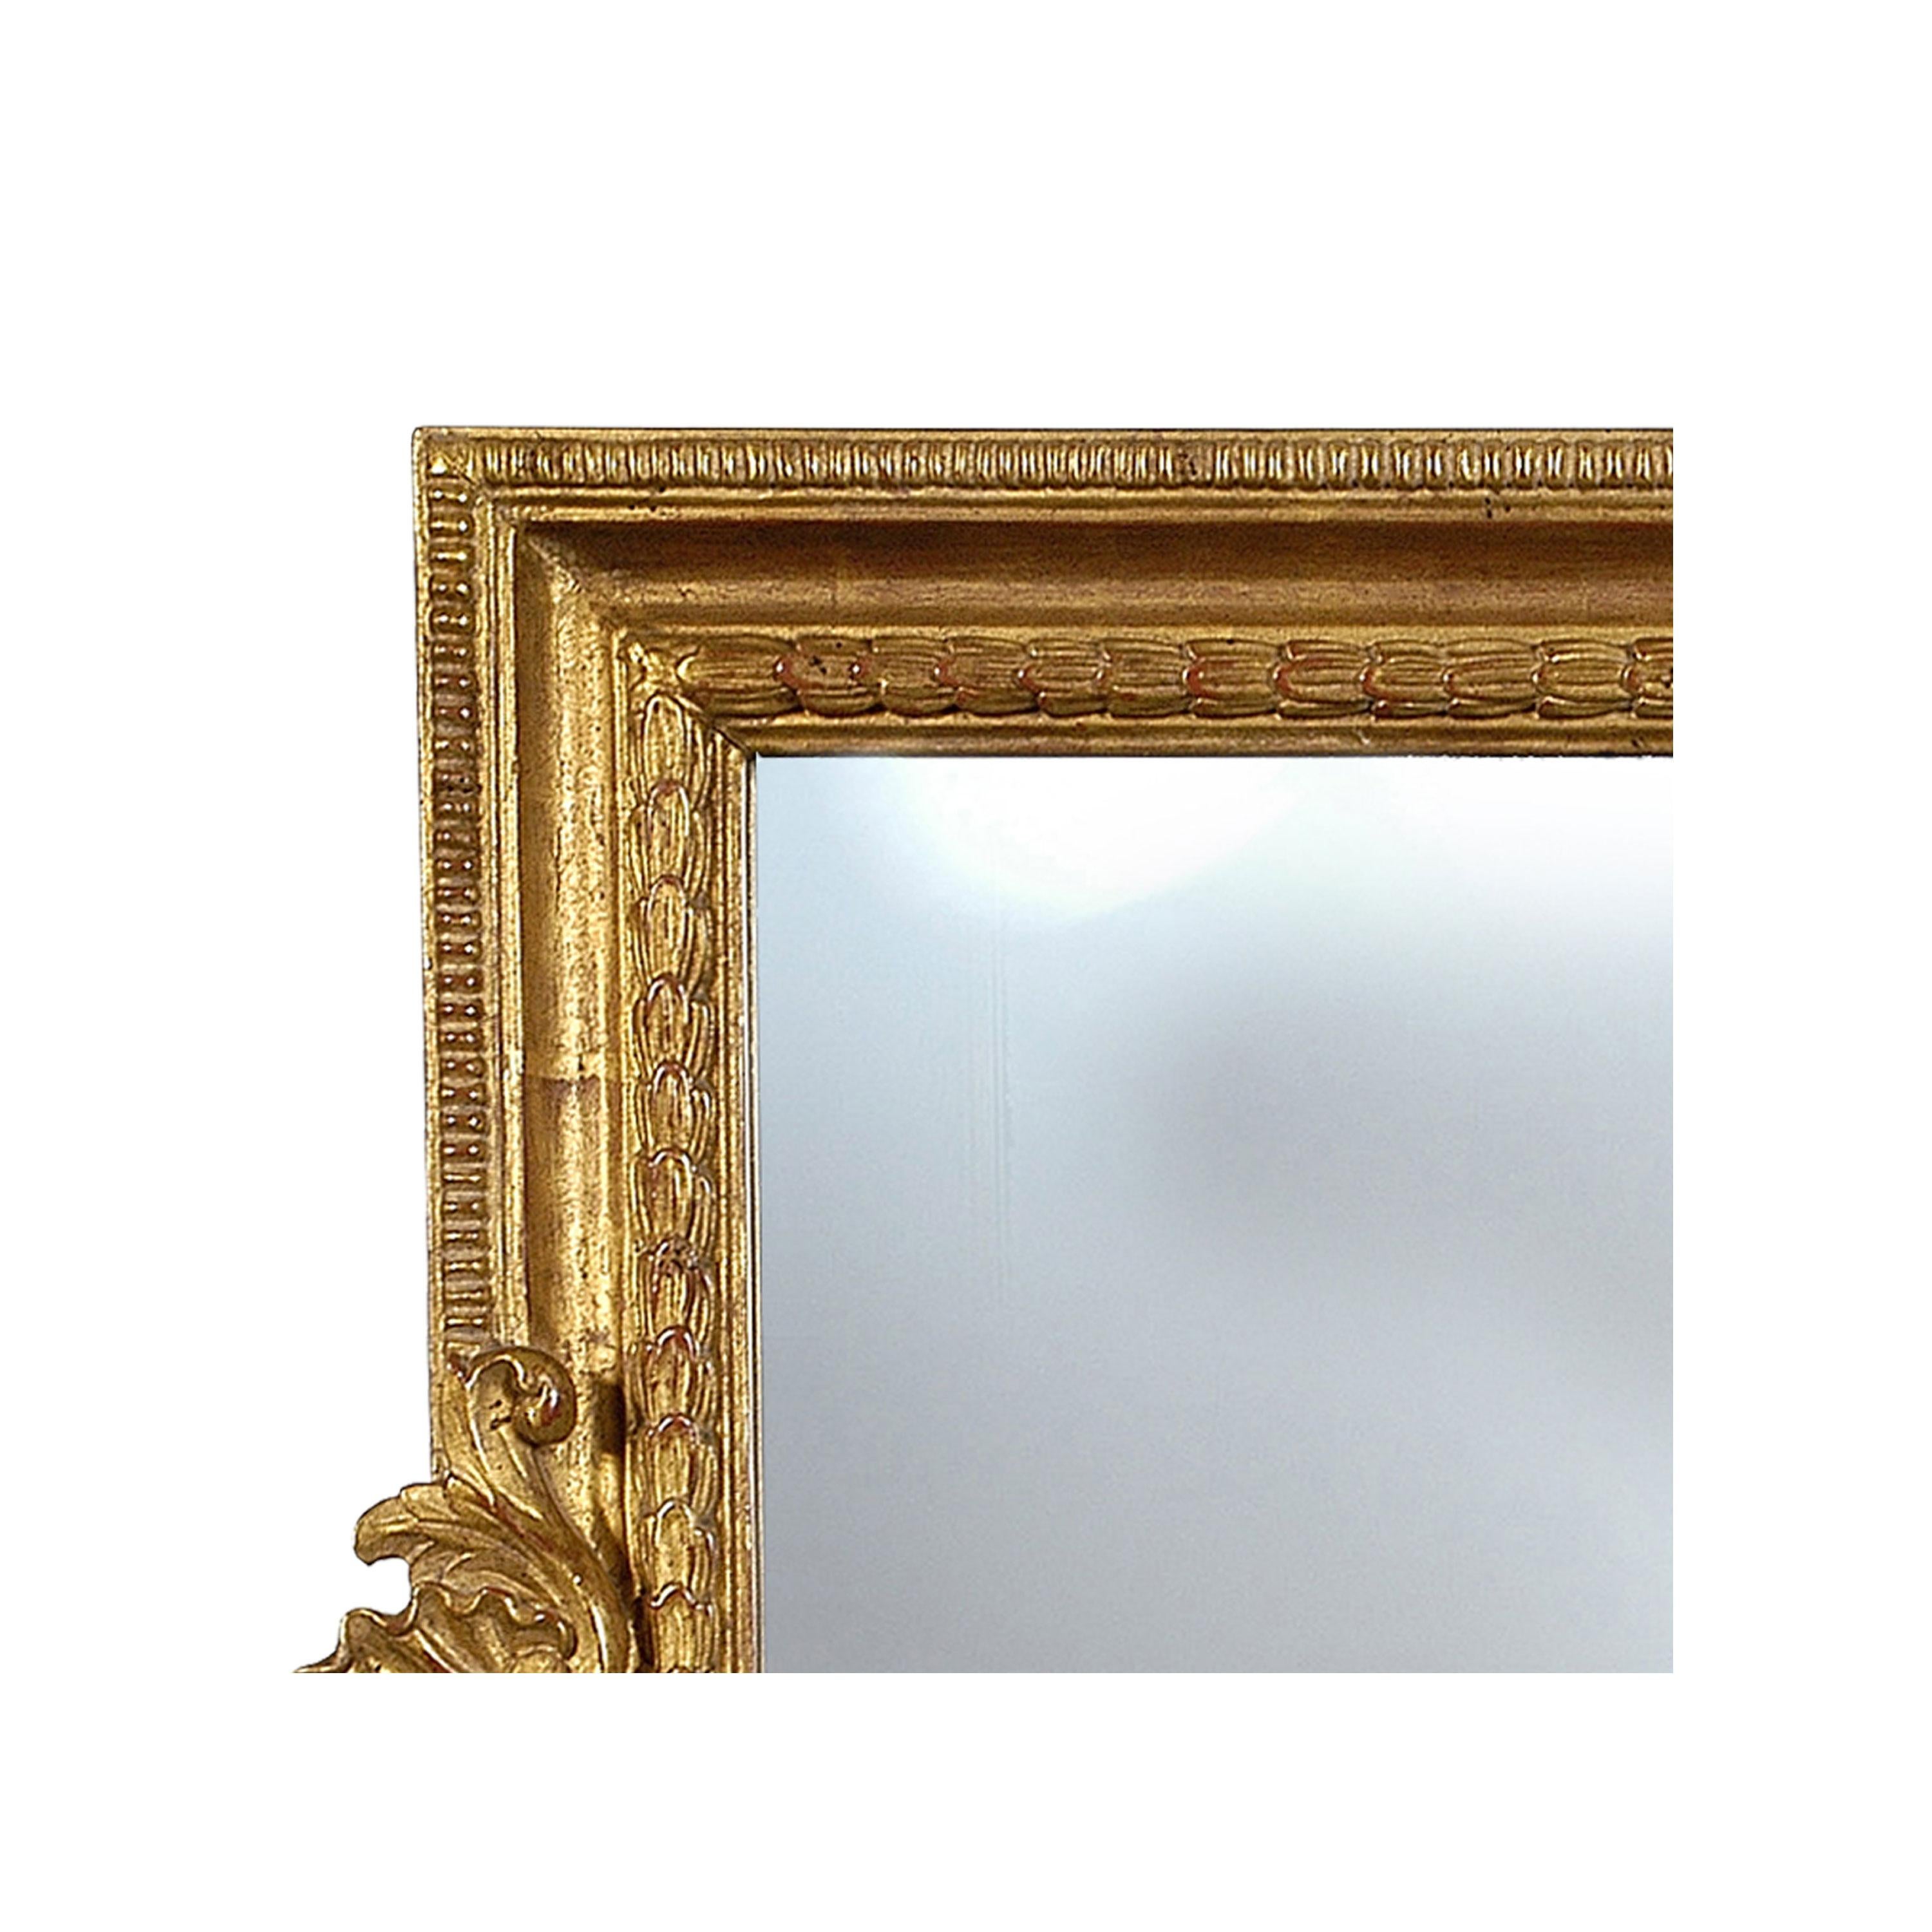 Spanish Neoclassical Regency Rectangular Gold Hand Carved Wooden Mirror